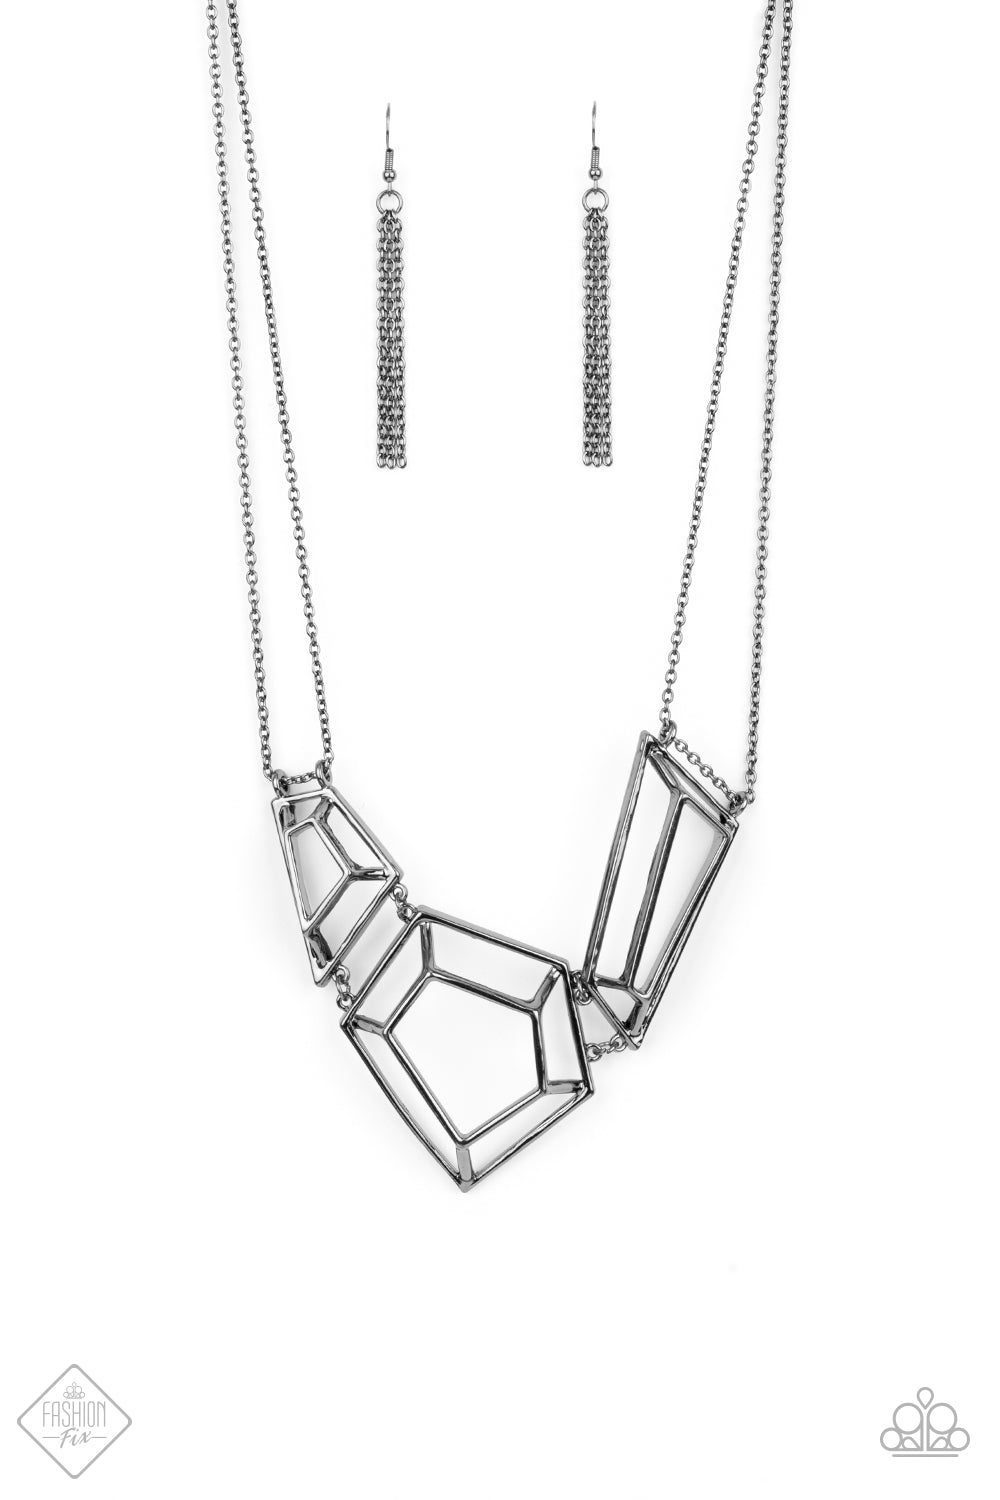 3-D Drama Black Necklace - Paparazzi Accessories  Glistening gunmetal bars connect into edgy 3-dimensional frames below the collar, creating a bold geometric statement piece. Features an adjustable clasp closure.  All Paparazzi Accessories are lead free and nickel free!  Sold as one individual necklace. Includes one pair of matching earrings.